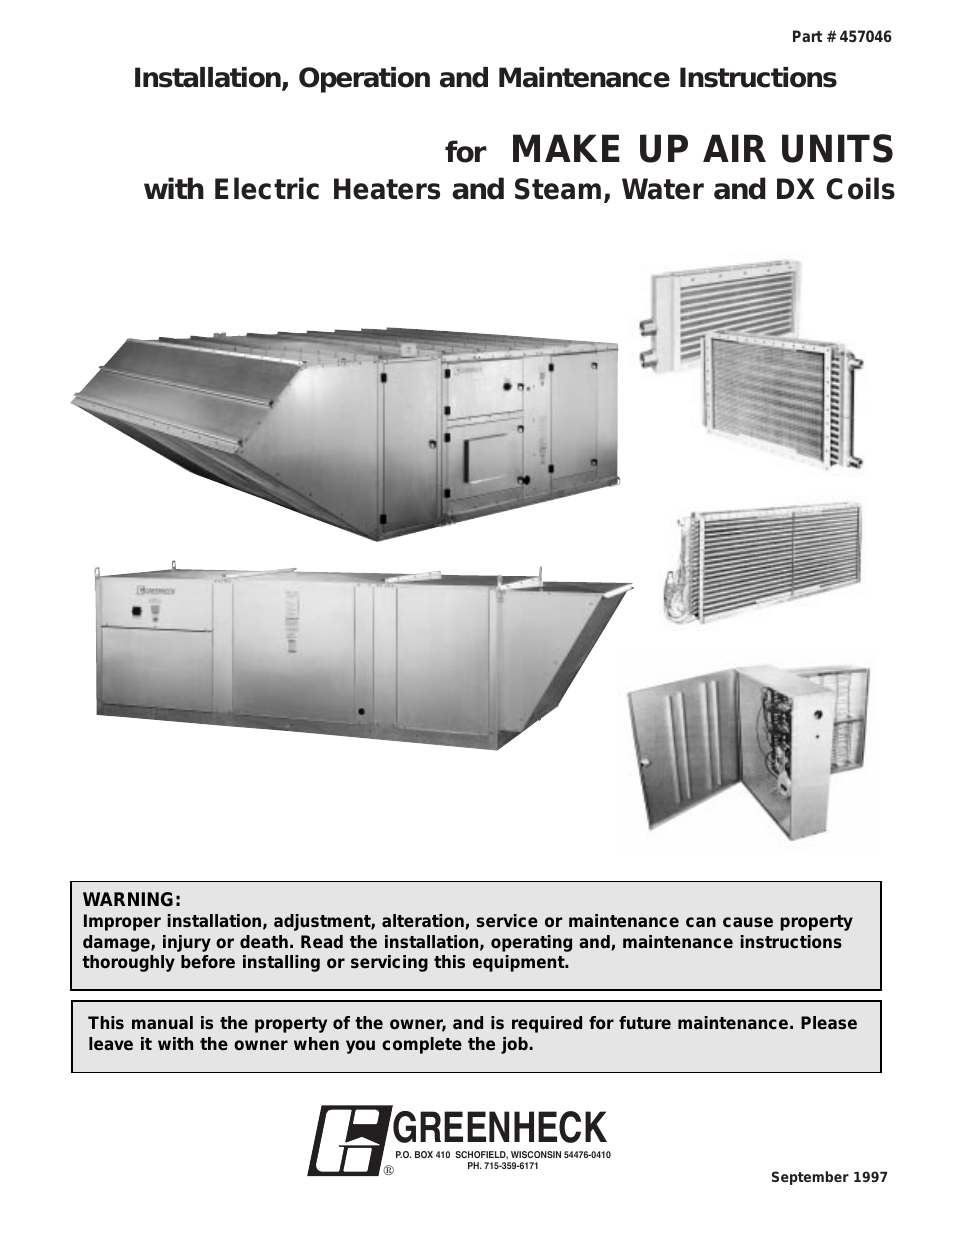 Make-Up Air Electric, Steam, Hot Water, Chlled Water, and DX Coils (457046)